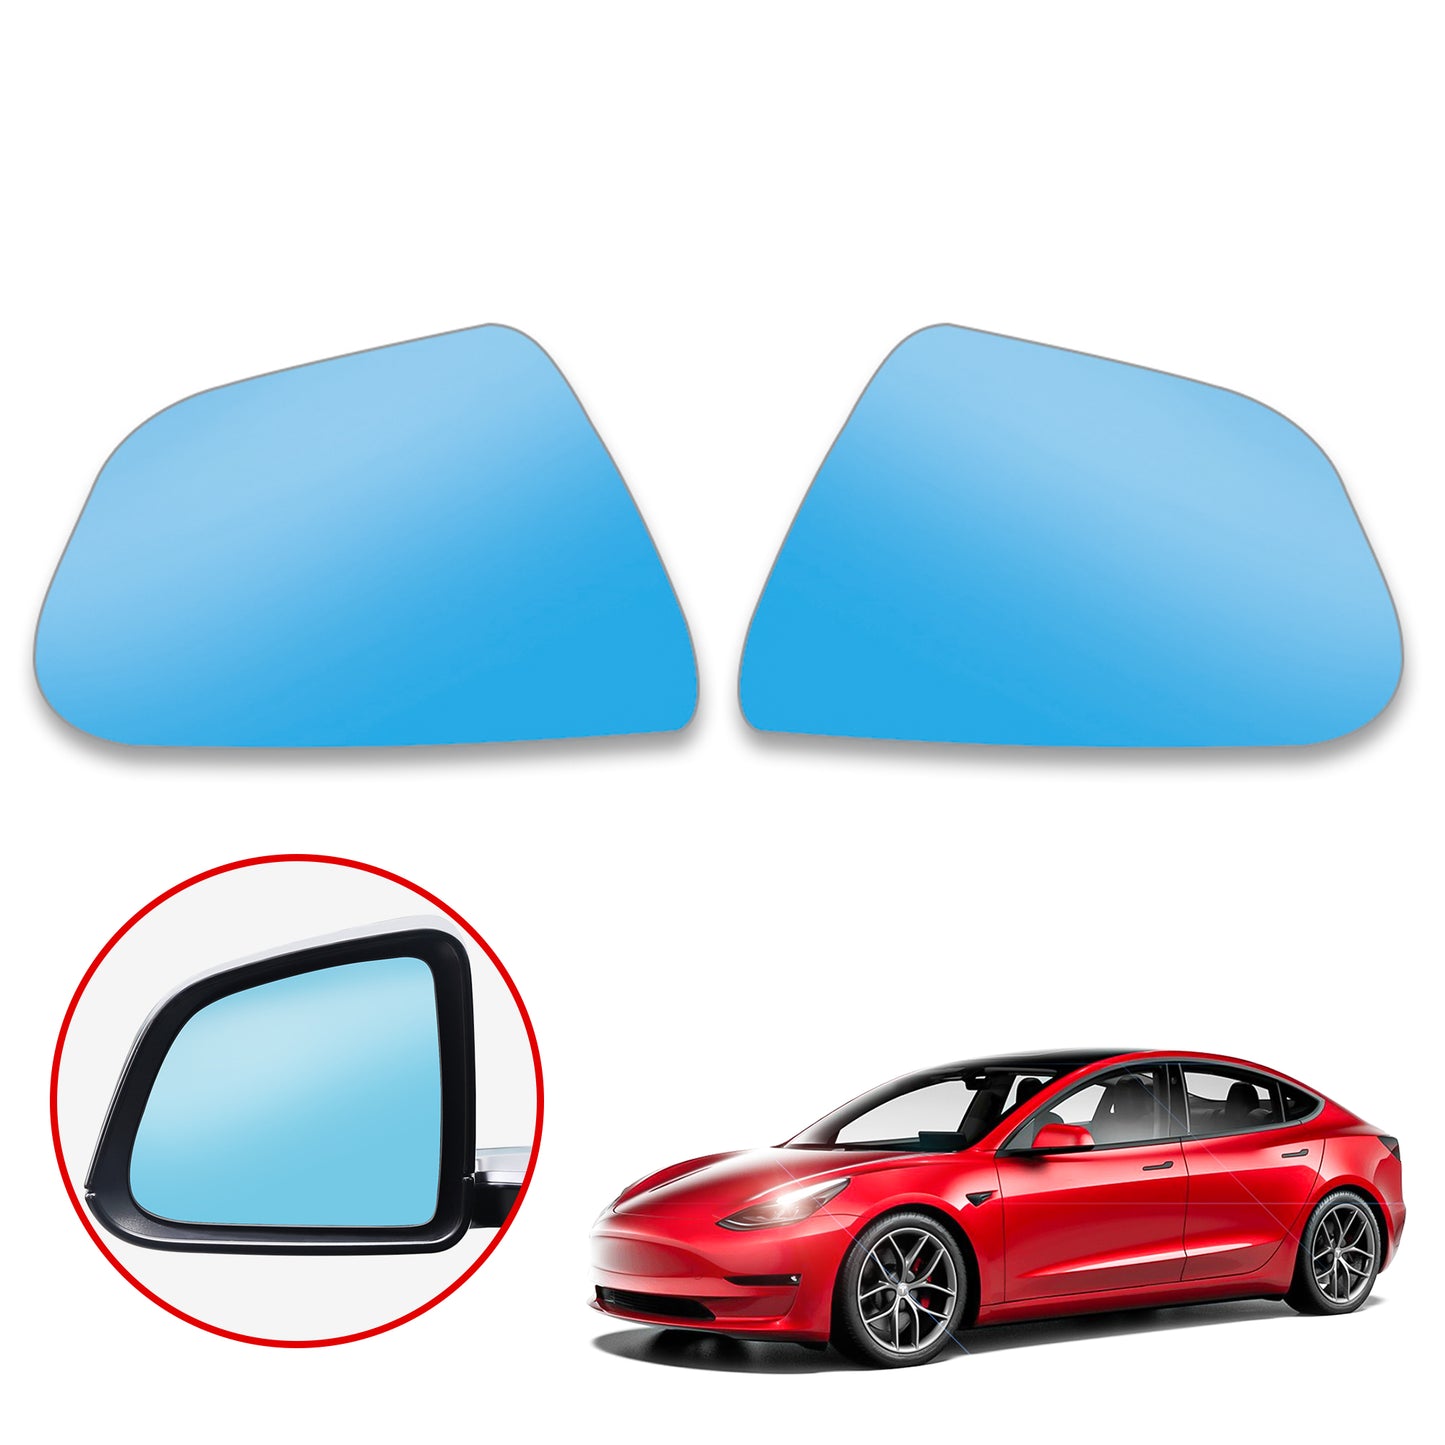 Arcoche Side Mirror for Tesla Model 3/Model y Rear View Mirror with Anti Glare Panoramic Blue Glass Lens and Heat defogging (1 Pair)